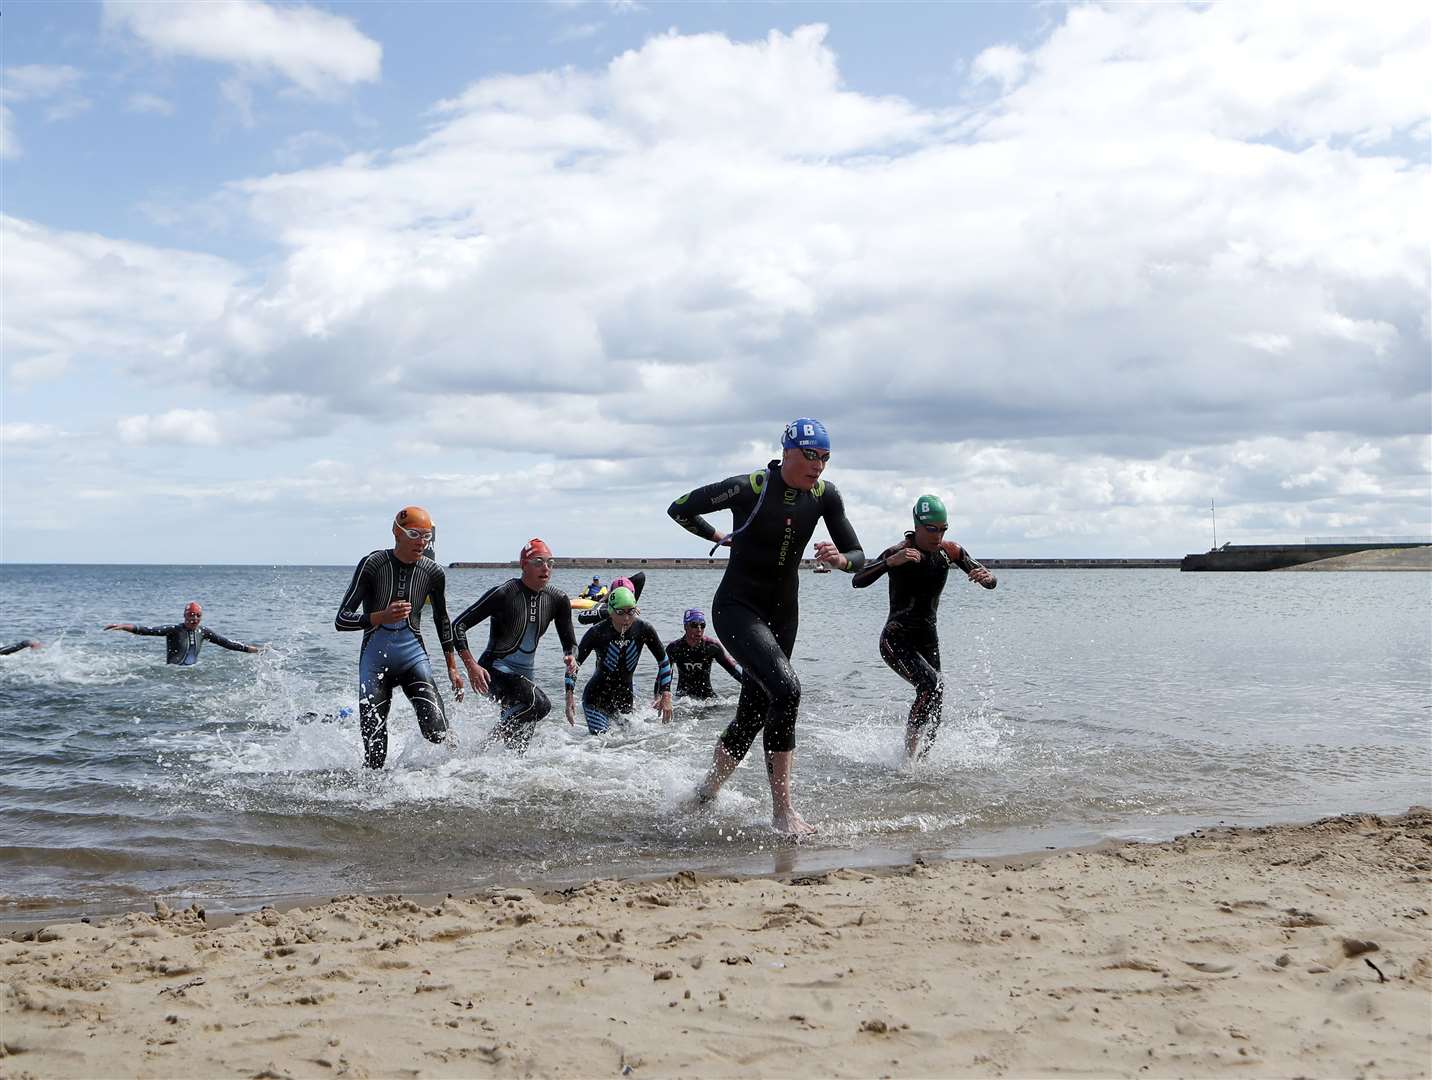 Competitors exit the water during the mixed relay event on day two of the 2023 World Triathlon Series event at Roker Beach, Sunderland on July 30 (Will Matthews/PA)